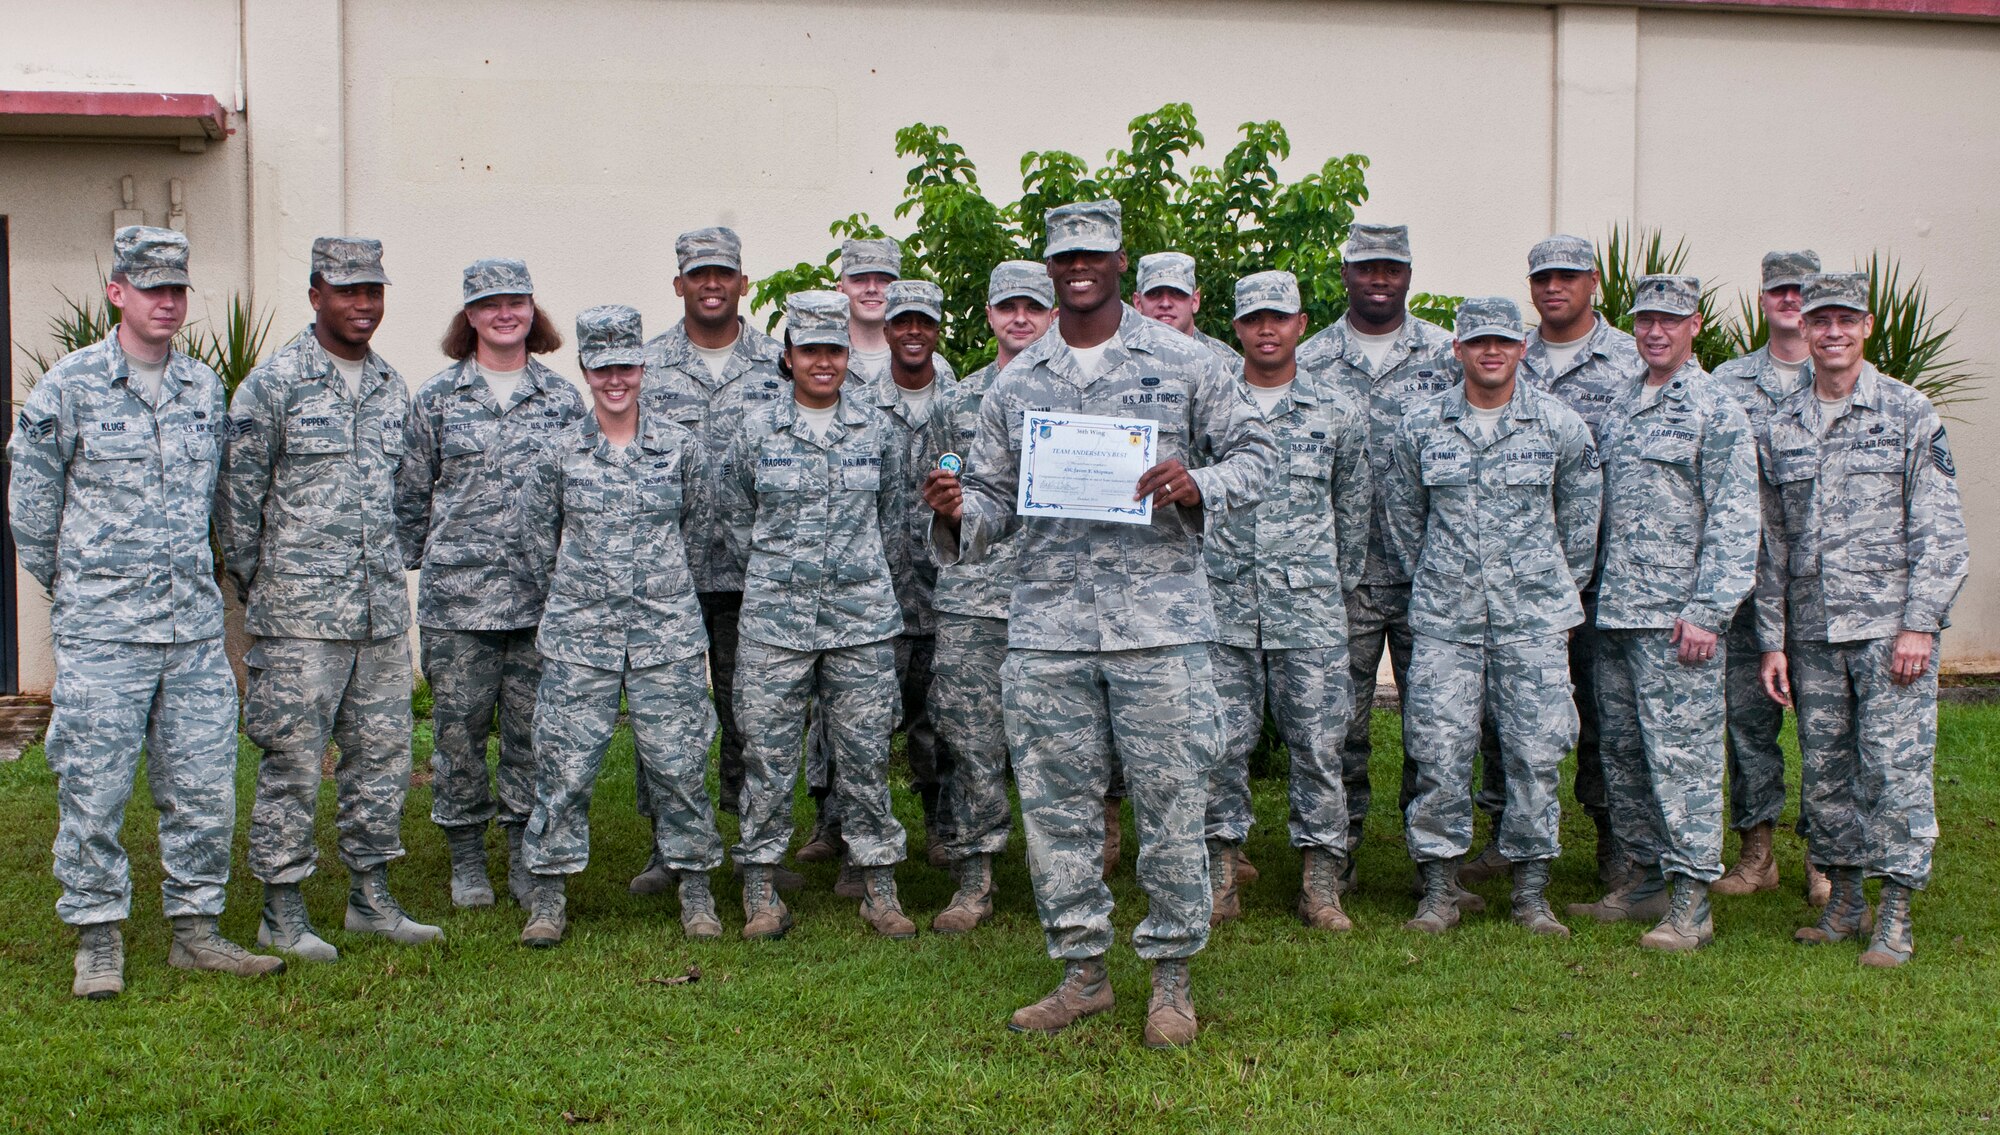 ANDERSEN AIR FORCE BASE, Guam—Airman 1st Class Javon Shipman, 36th Contingency Response Group cyber surety apprentice, was awarded Team Andersen's Best here, Oct. 20. Andersen's Best is a recognition program which highlights a top performer from the 36th Wing. Each week, supervisors nominate a member of their team for outstanding performance and the wing commander presents the selected Airman/civilian with an award. (U.S. Air Force photo/Senior Airman Benjamin Wiseman/Released)